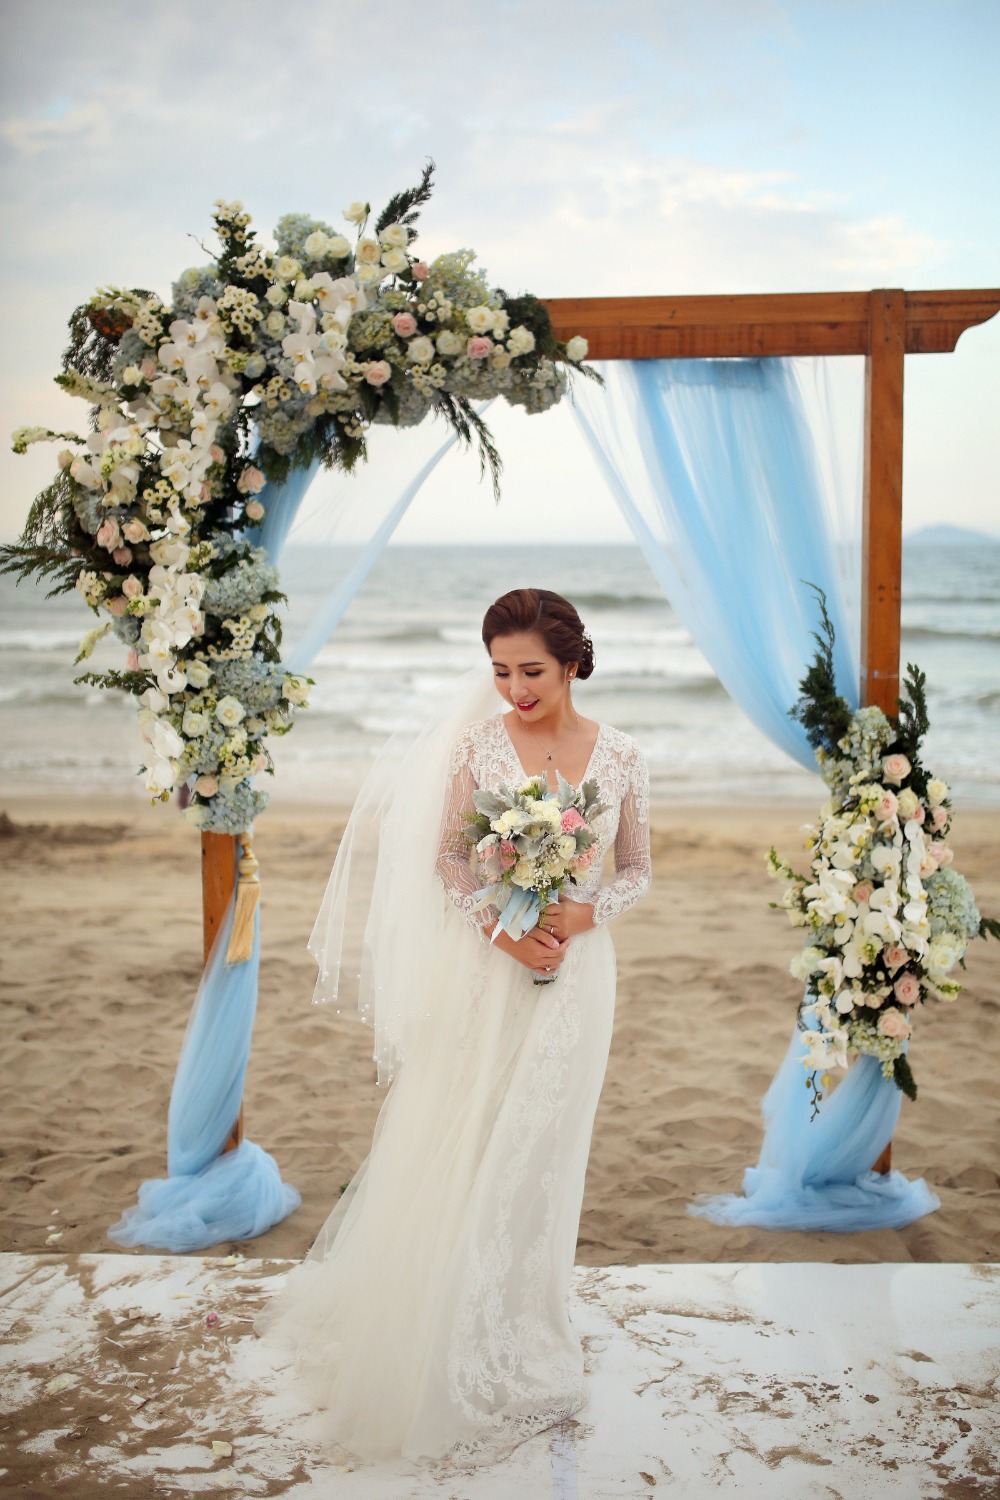 How To Have The Perfect Beach Wedding In Vietnam